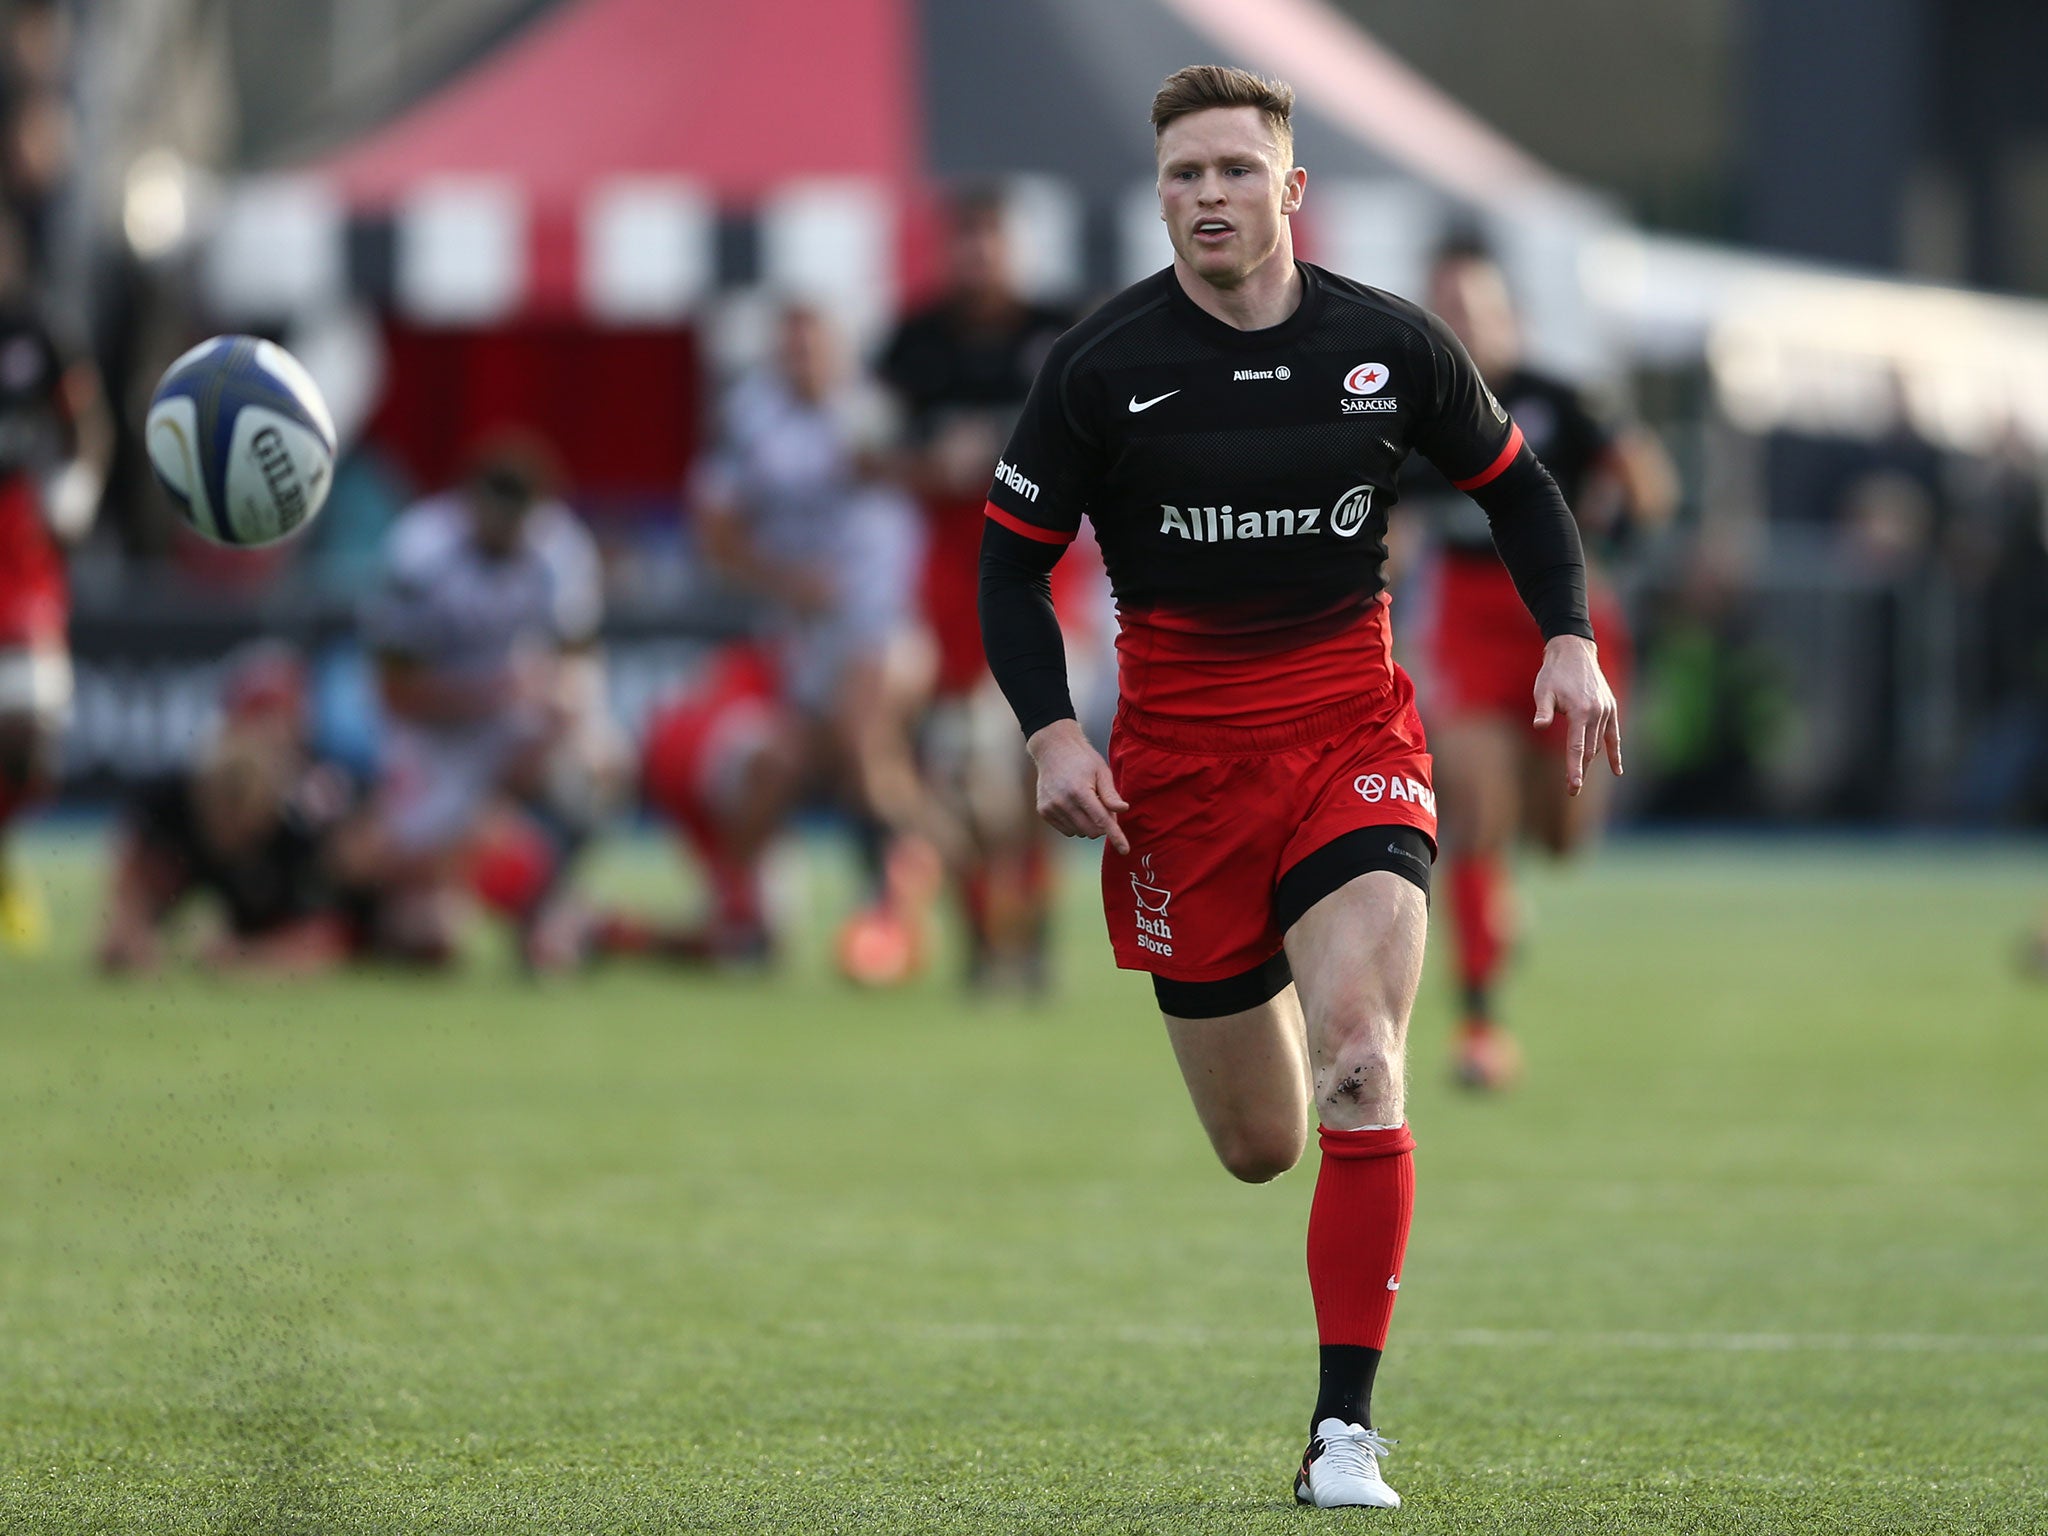 Saracens wing Chris Ashton has been banned for 10 weeks, ruling him out of the Six Nations